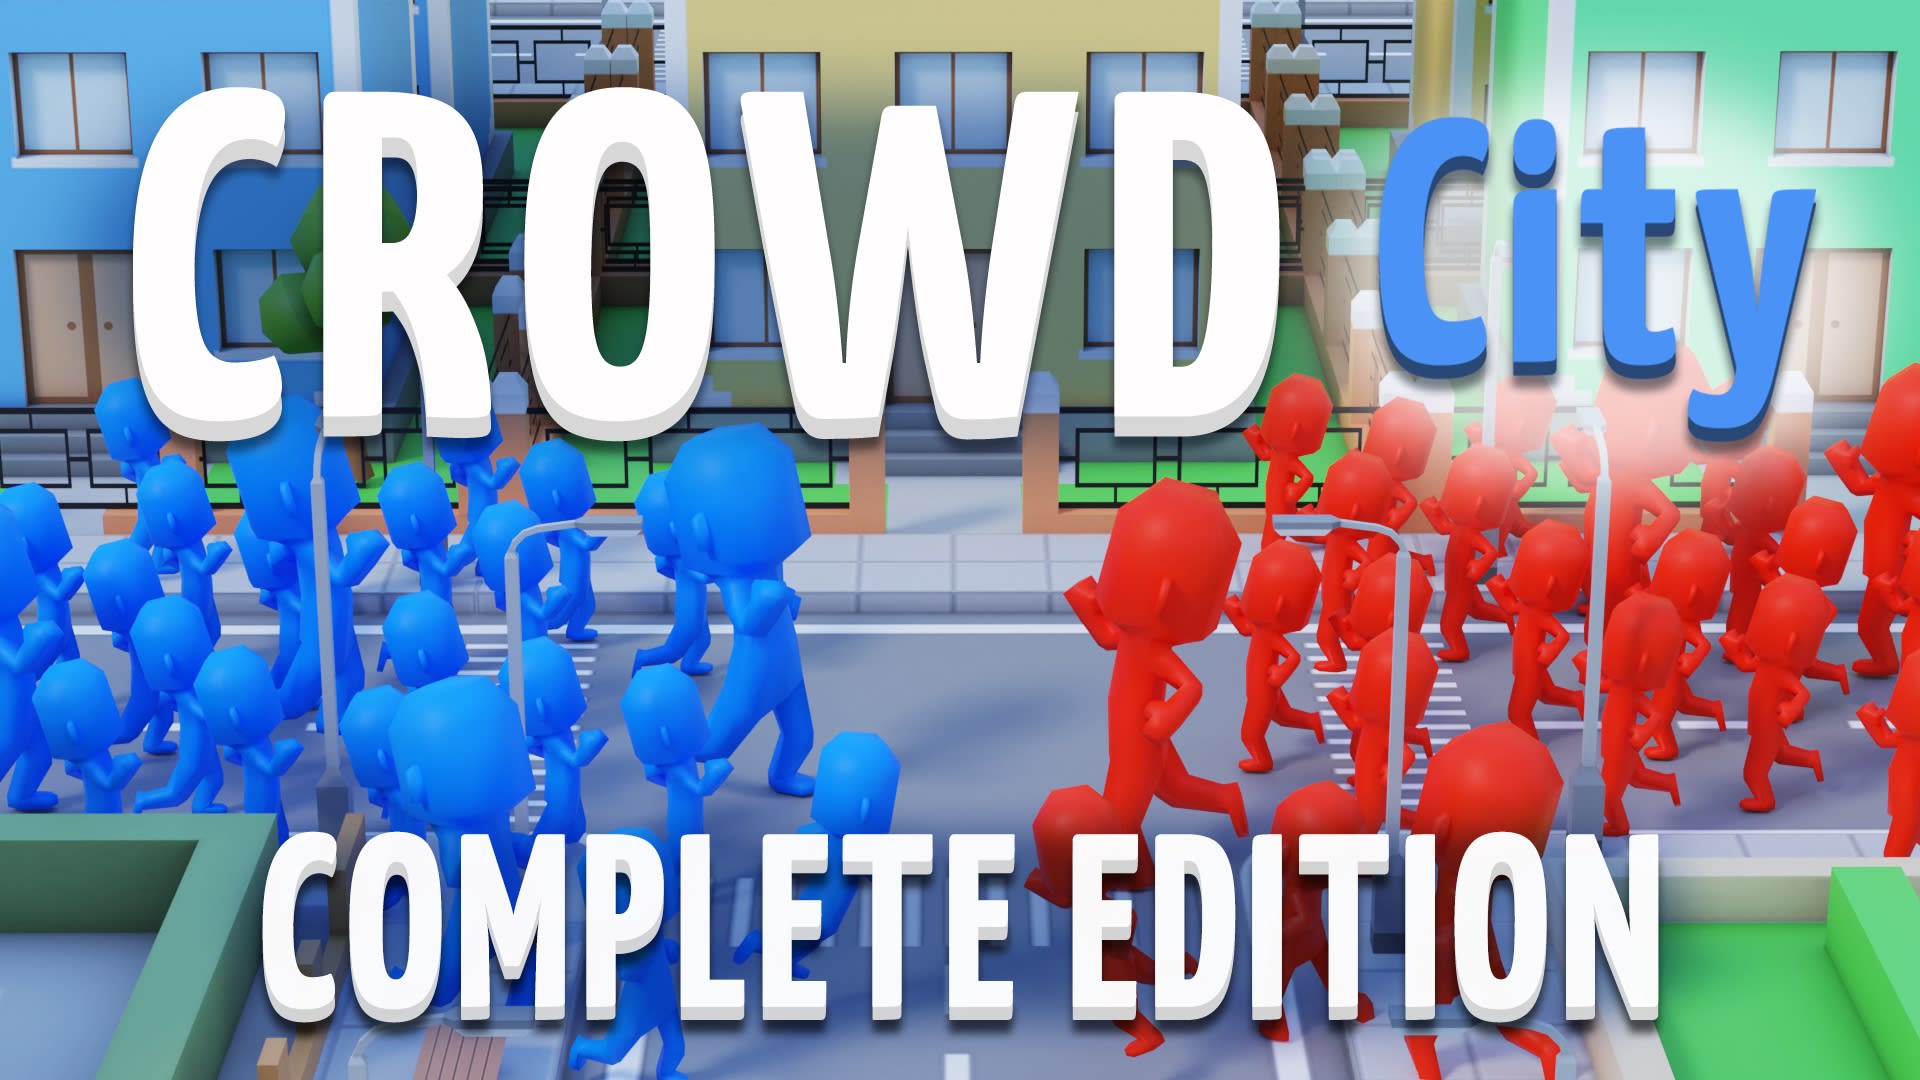 Crowd City: Complete Edition